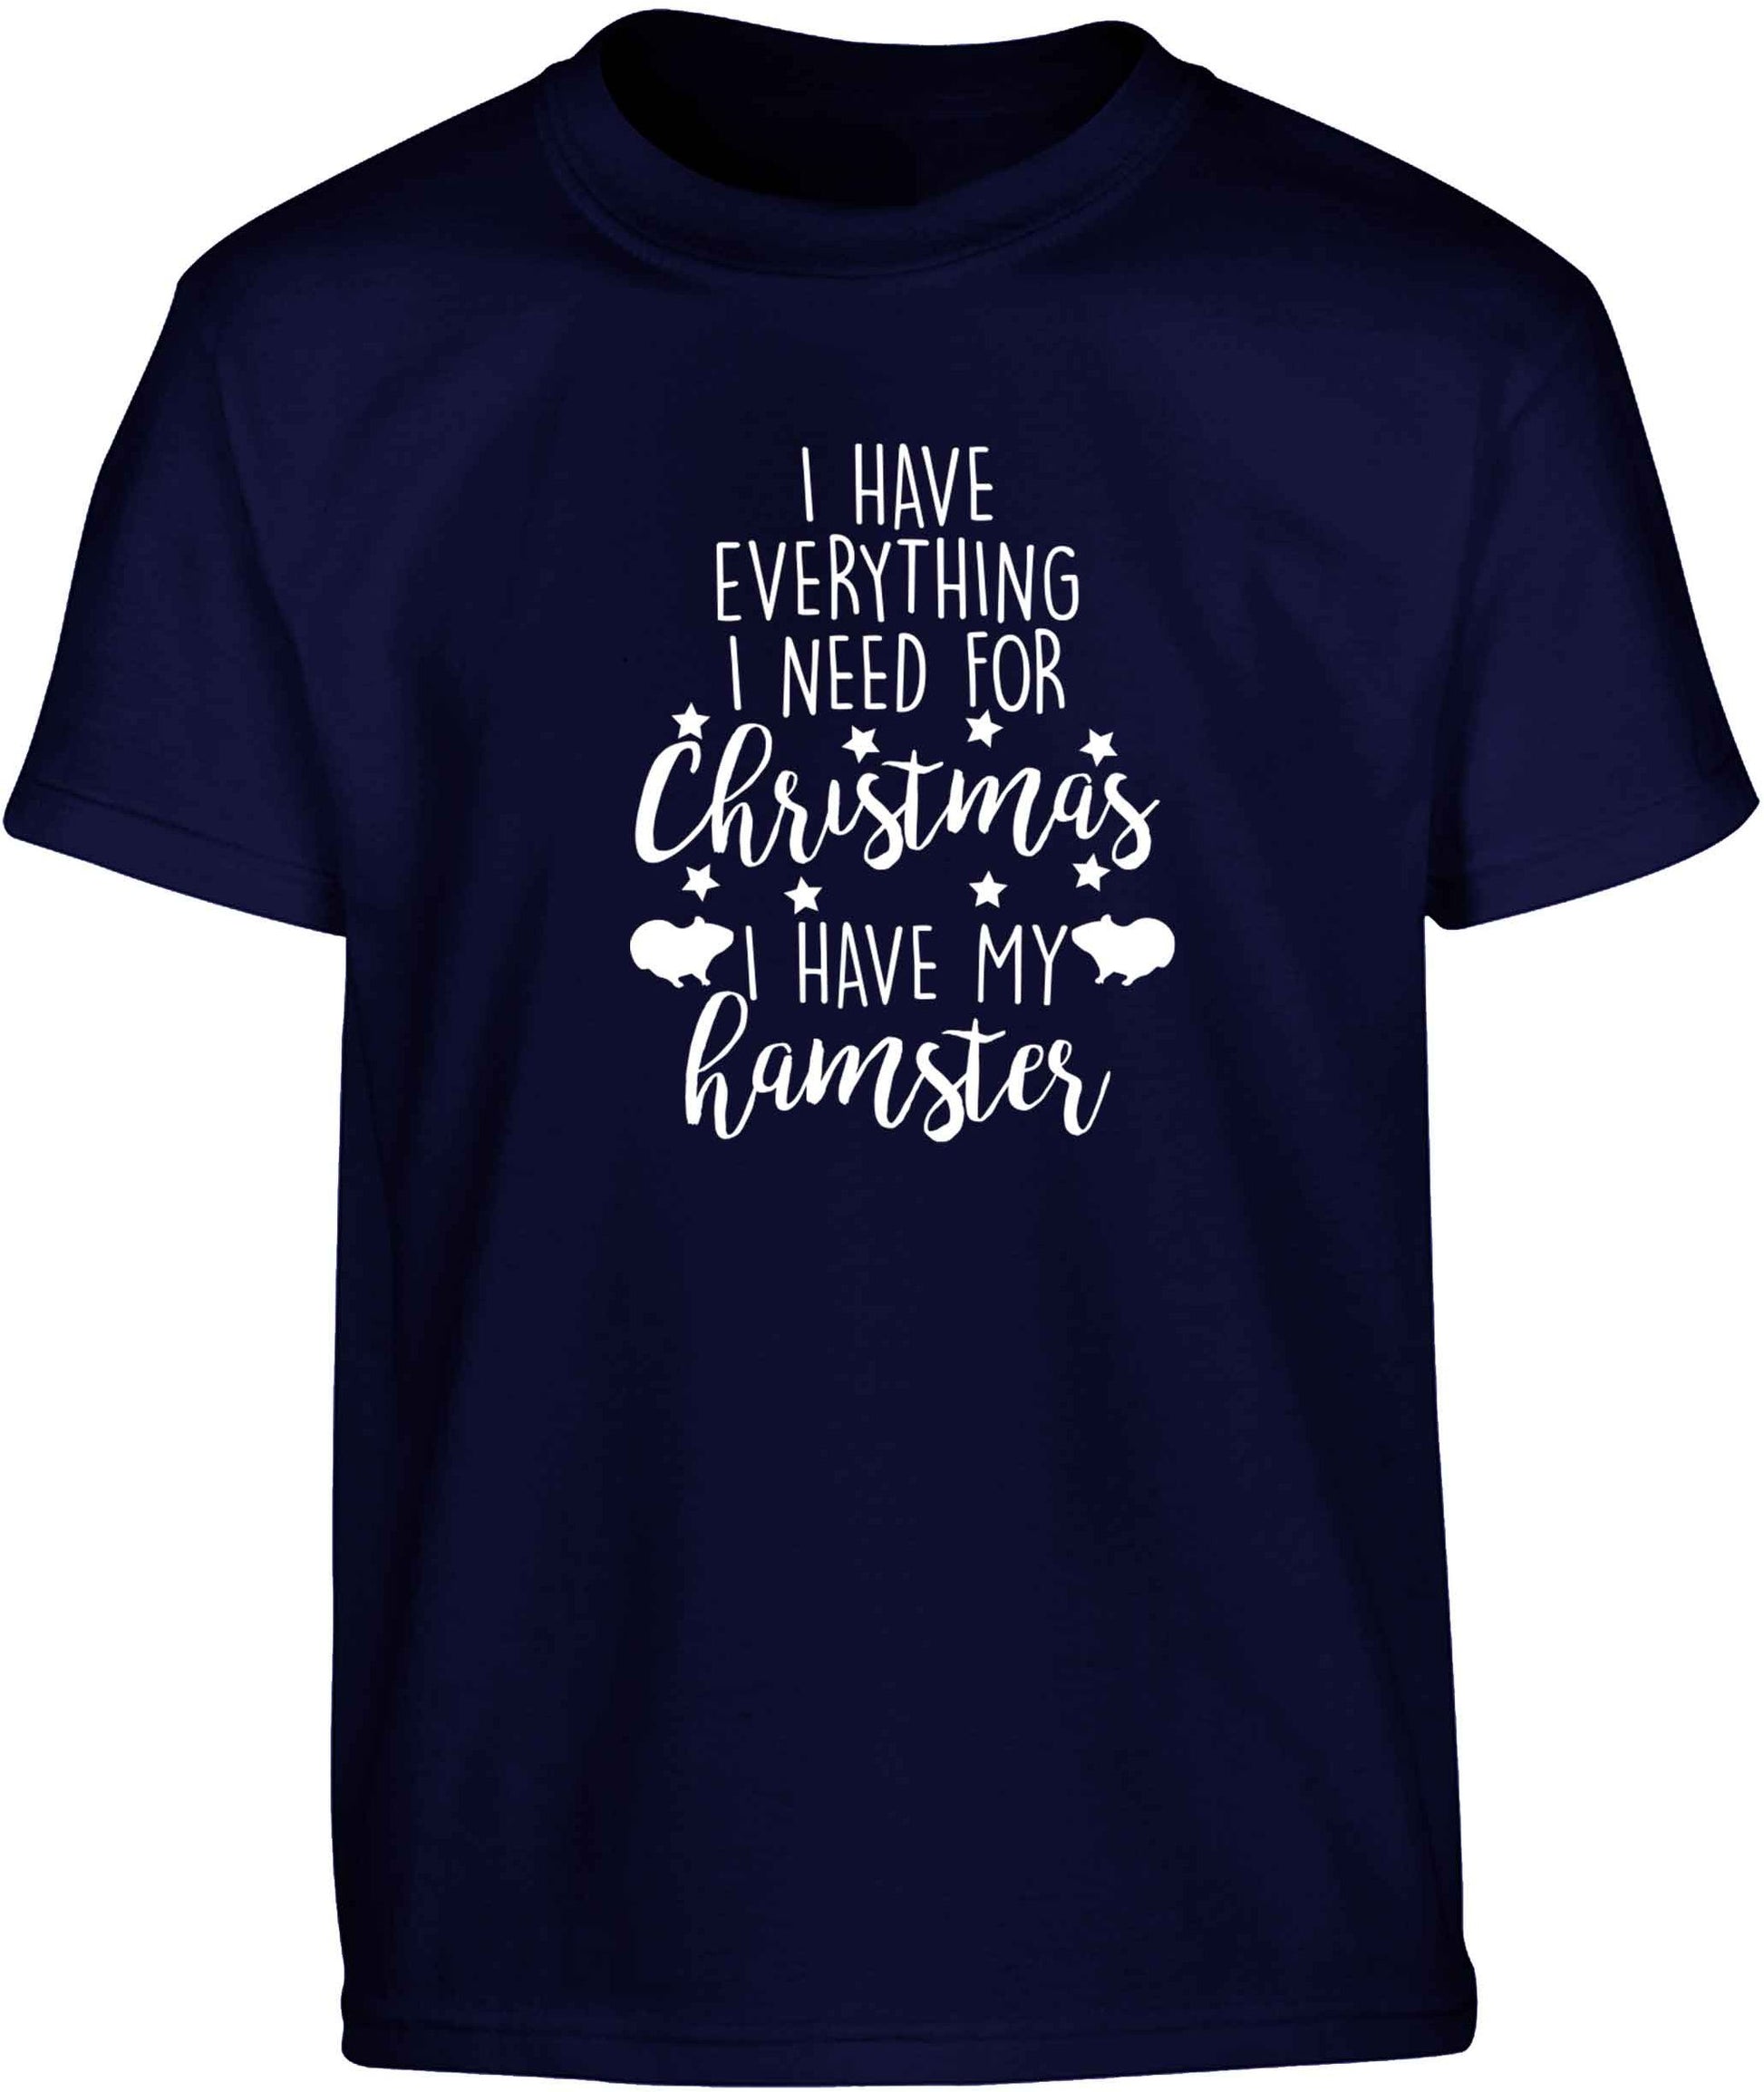 I have everything I need for Christmas I have my hamster Children's navy Tshirt 12-13 Years